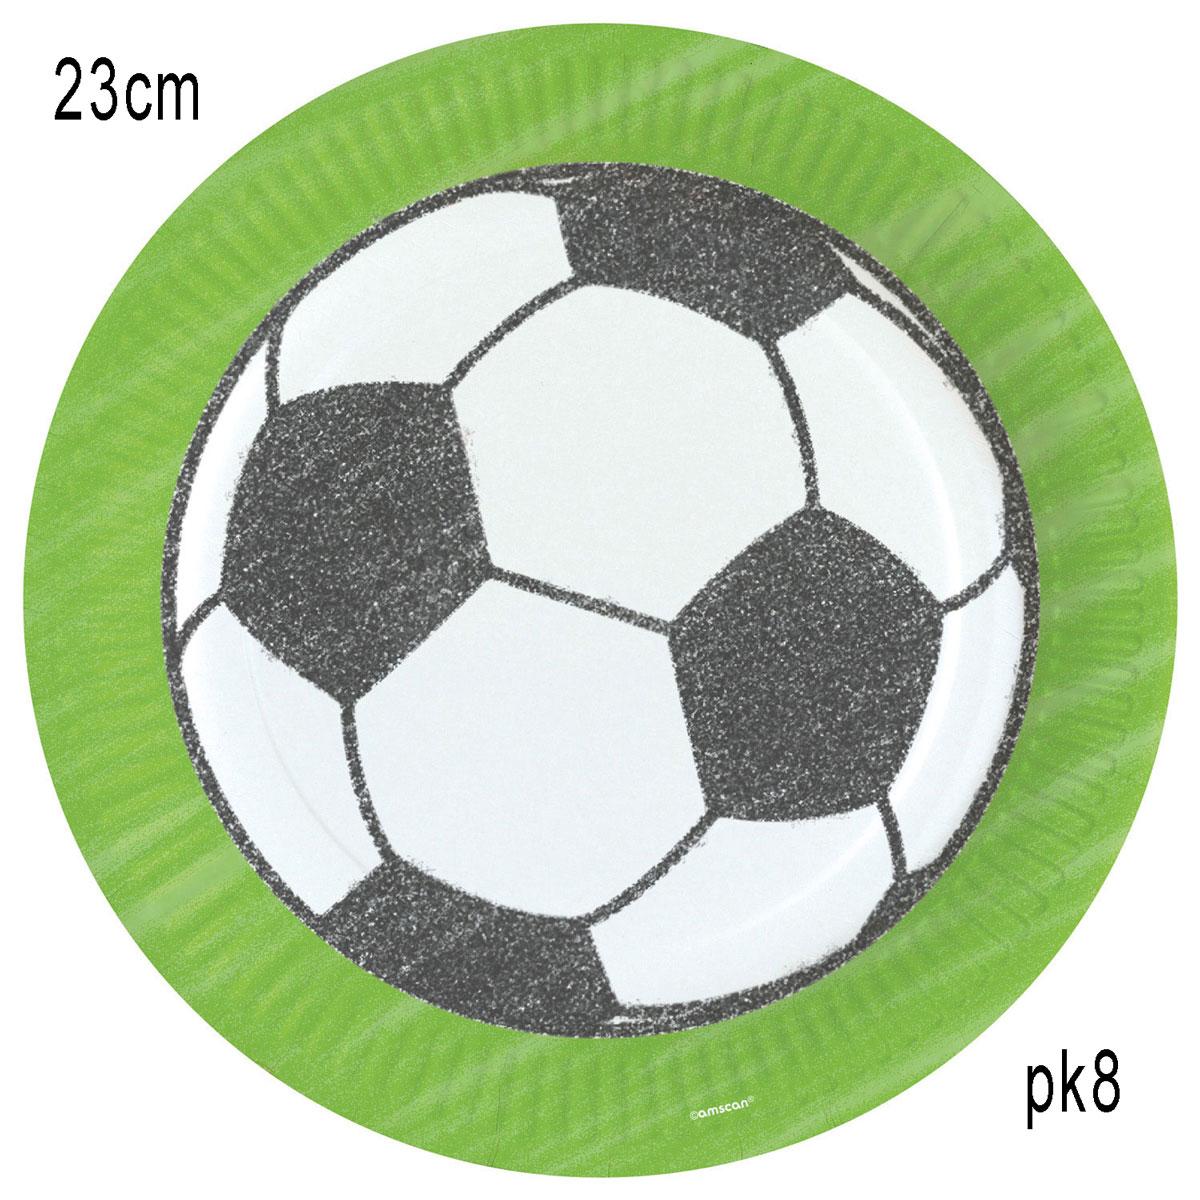 Kicker Party Football Dinner Paper Plates 23cm by Amscan 9903005 available here at Karnival Costumes online party shop